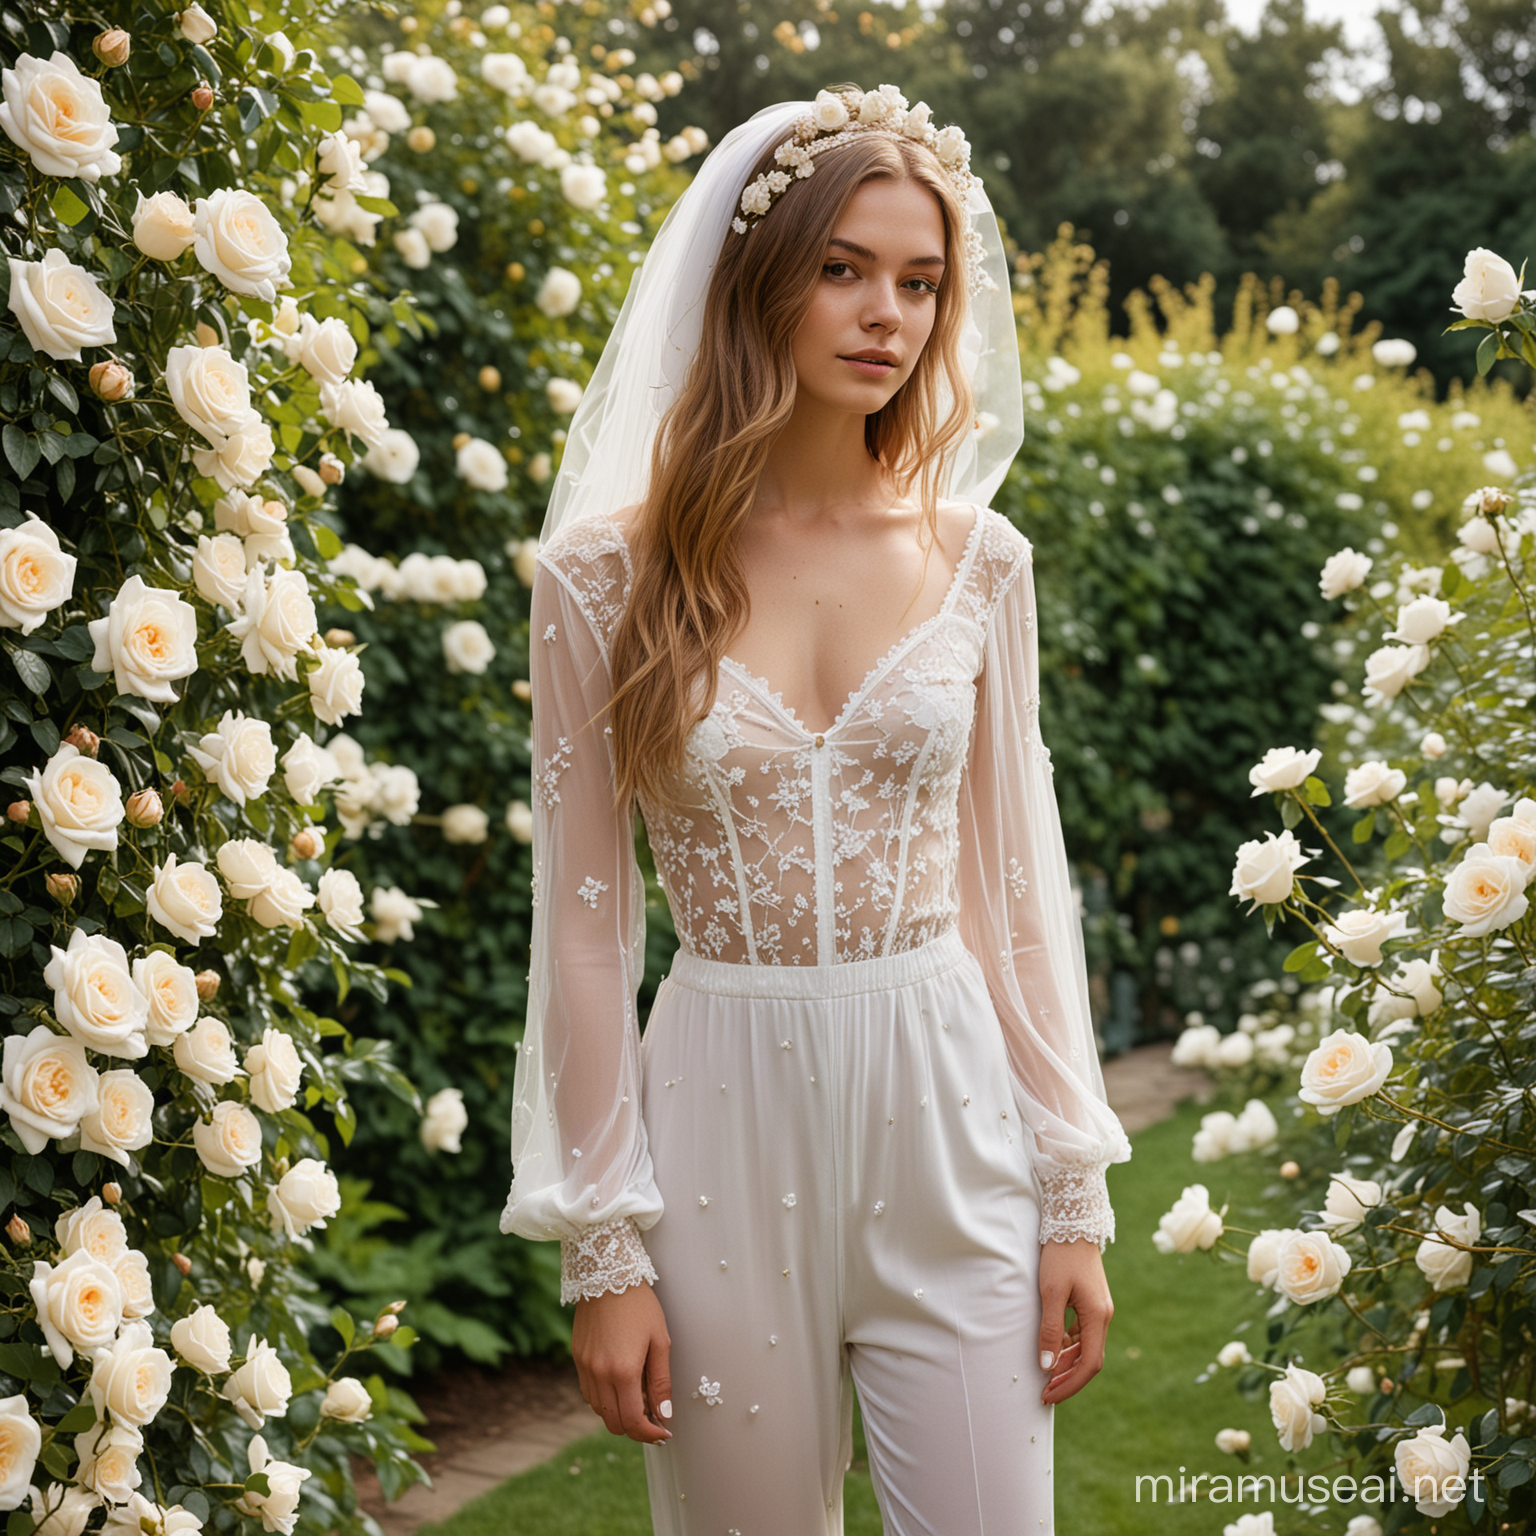 A young woman, not tall, skinny, with a small butt and small breasts, with a short neck and fingers. With long, thick light brown hair. Dressed in a veil, a wedding white jumpsuit embroidered with gold roses and white Converse sneakers. Standing at a wedding in a luxurious garden with roses 